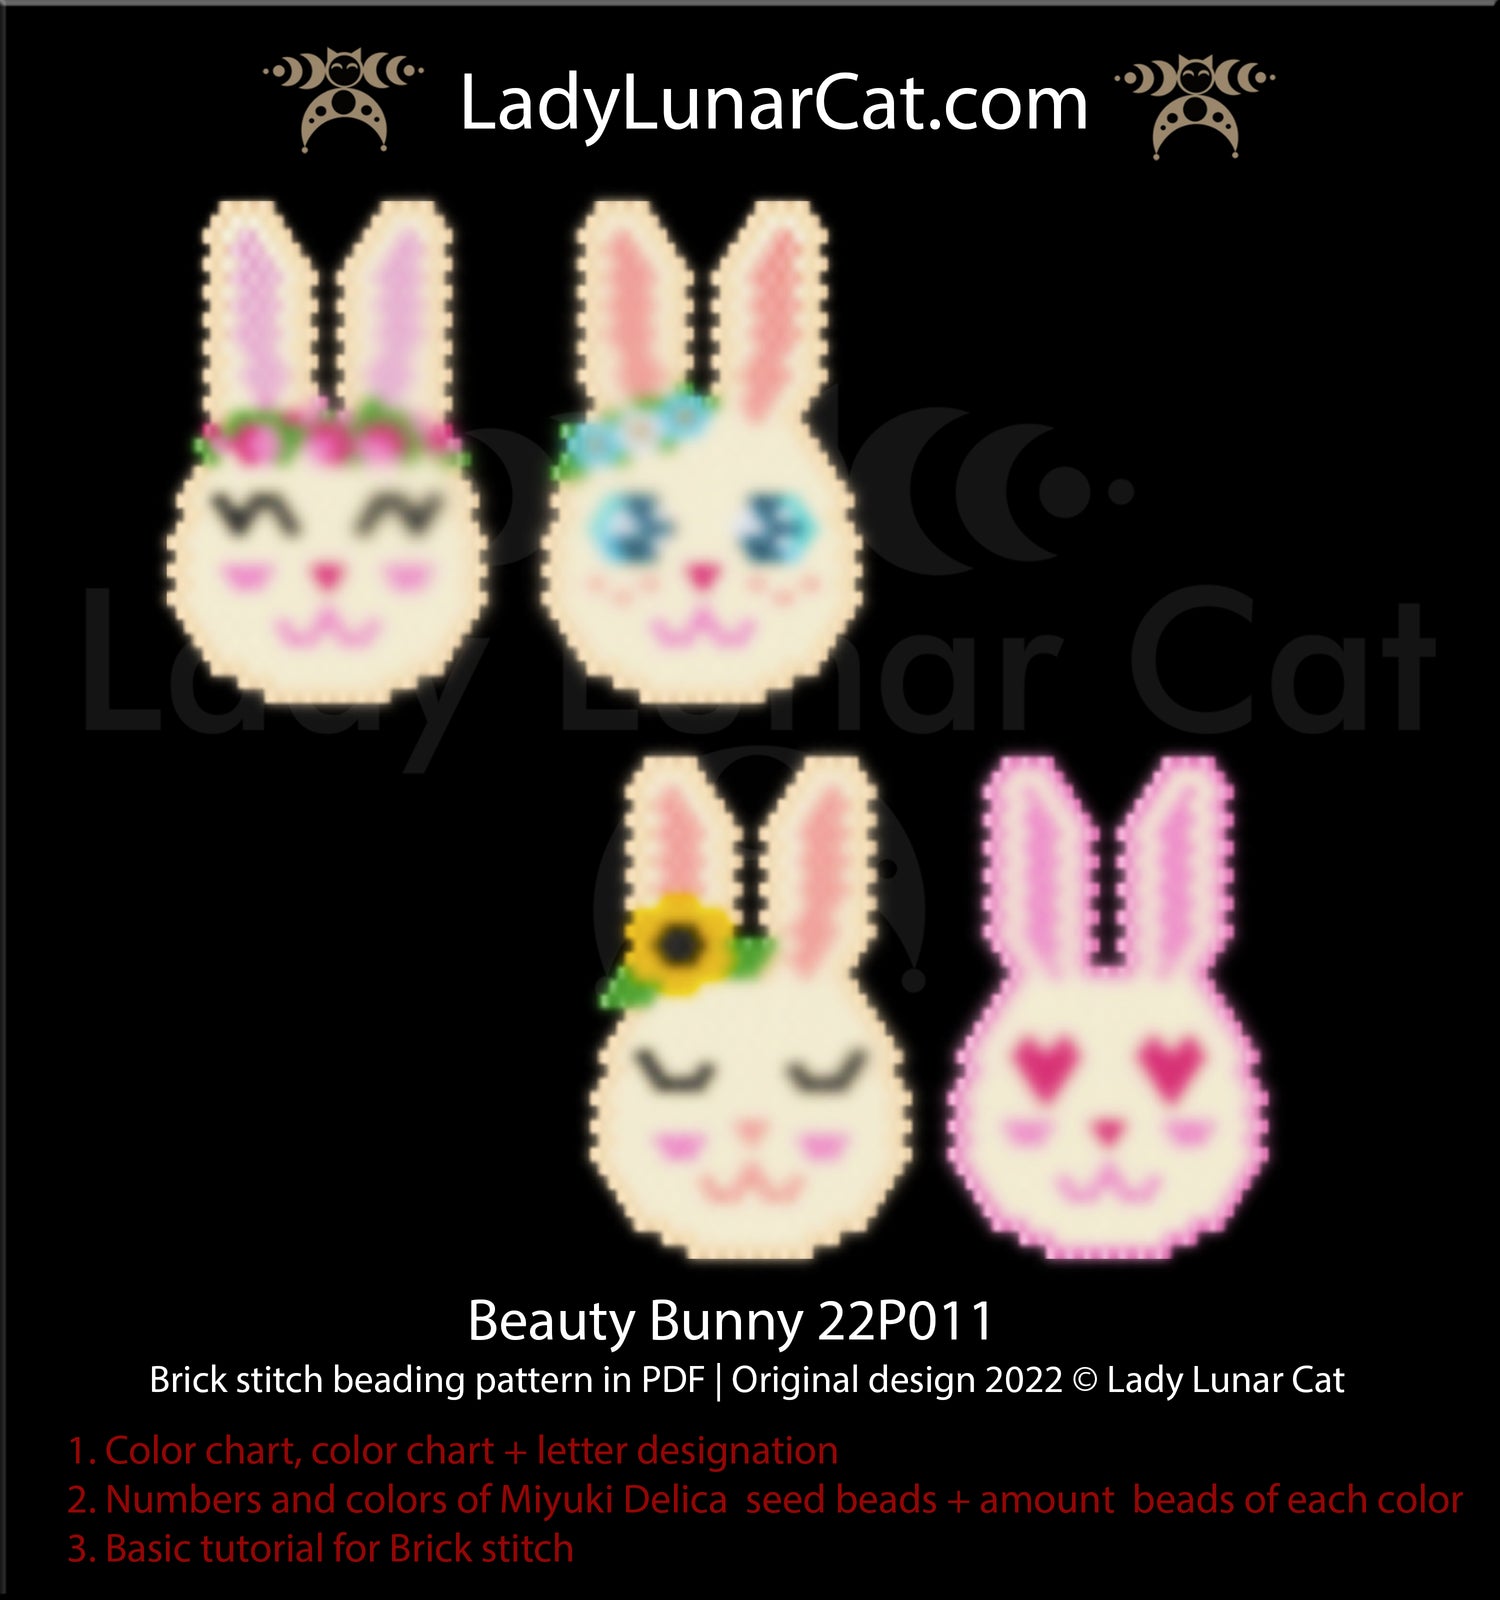 Spring and Easter beading patterns